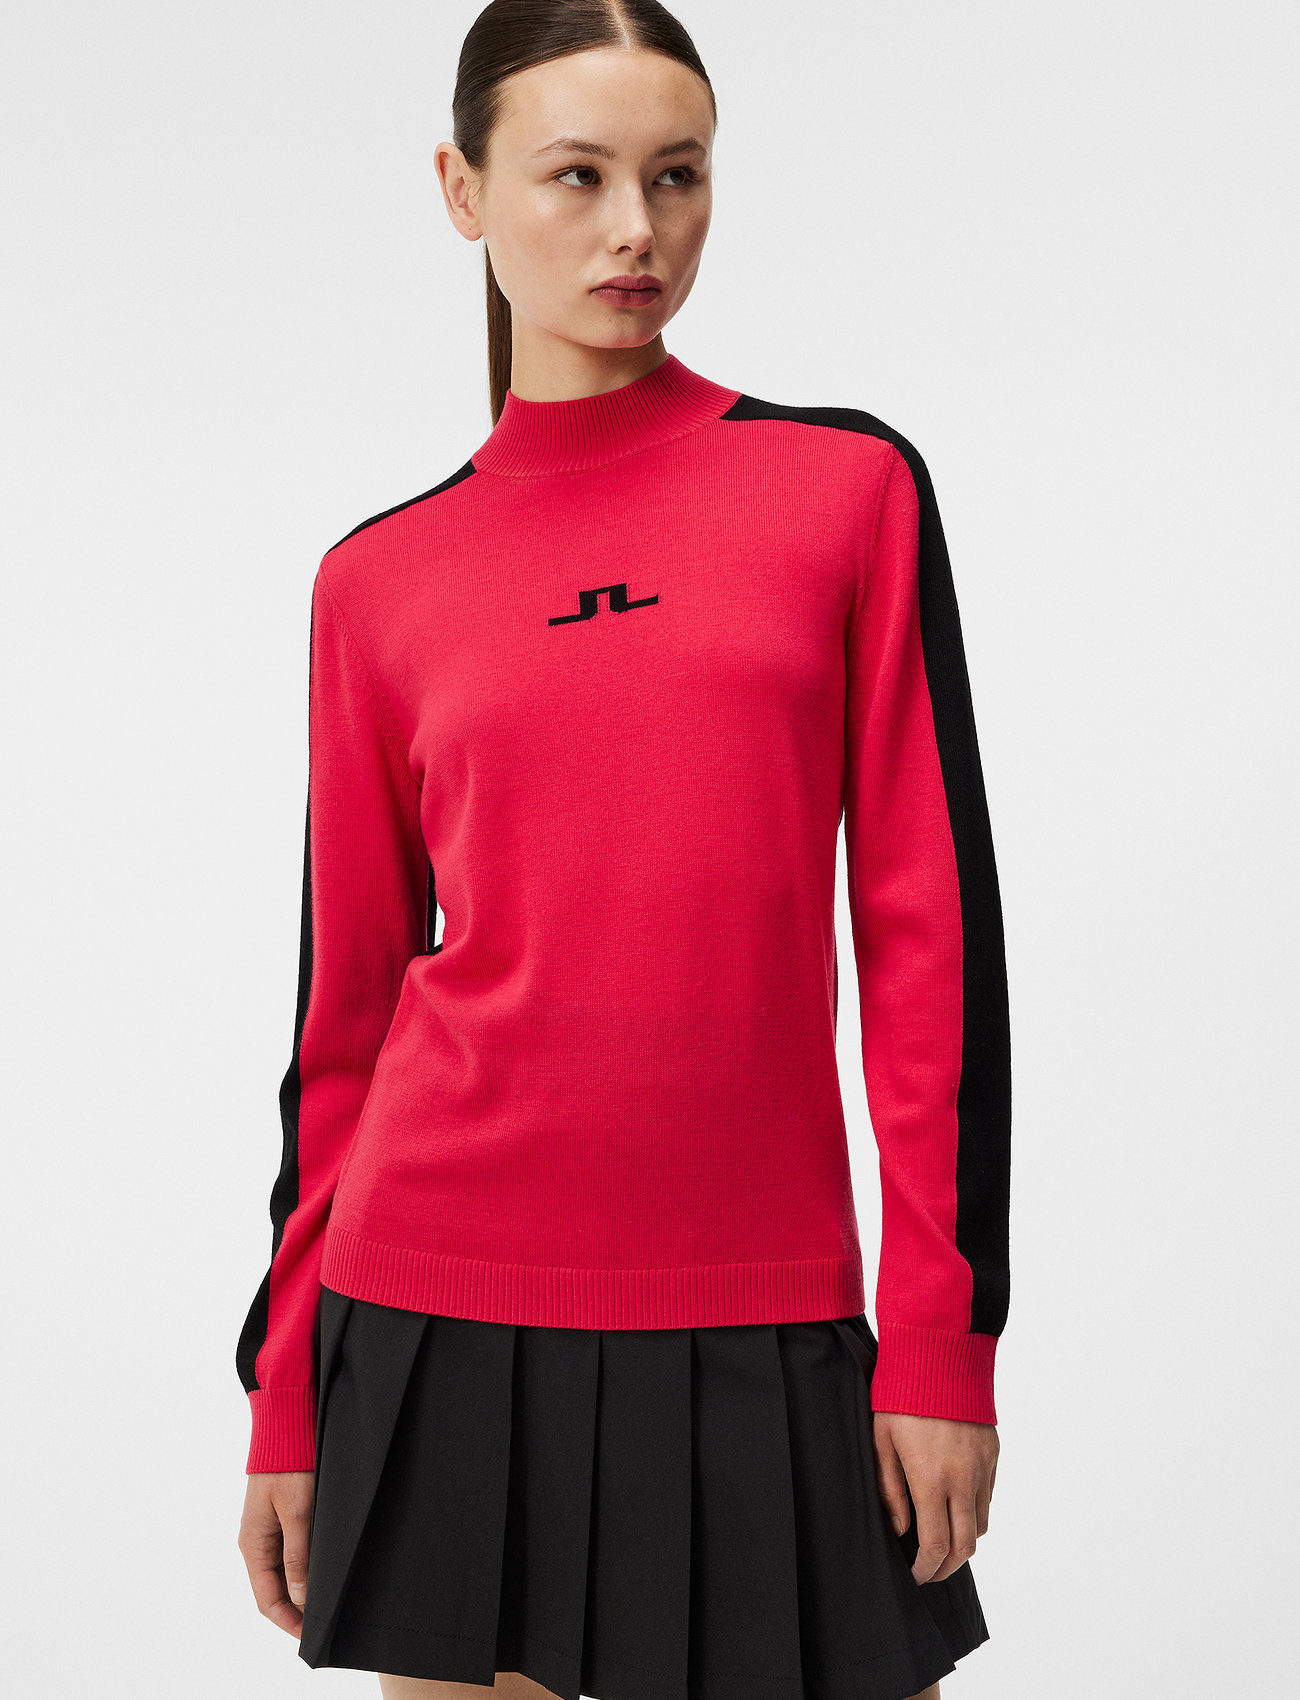 J. Lindeberg - Adeline Knitted Sweater - poolopaidat - rose red - 1